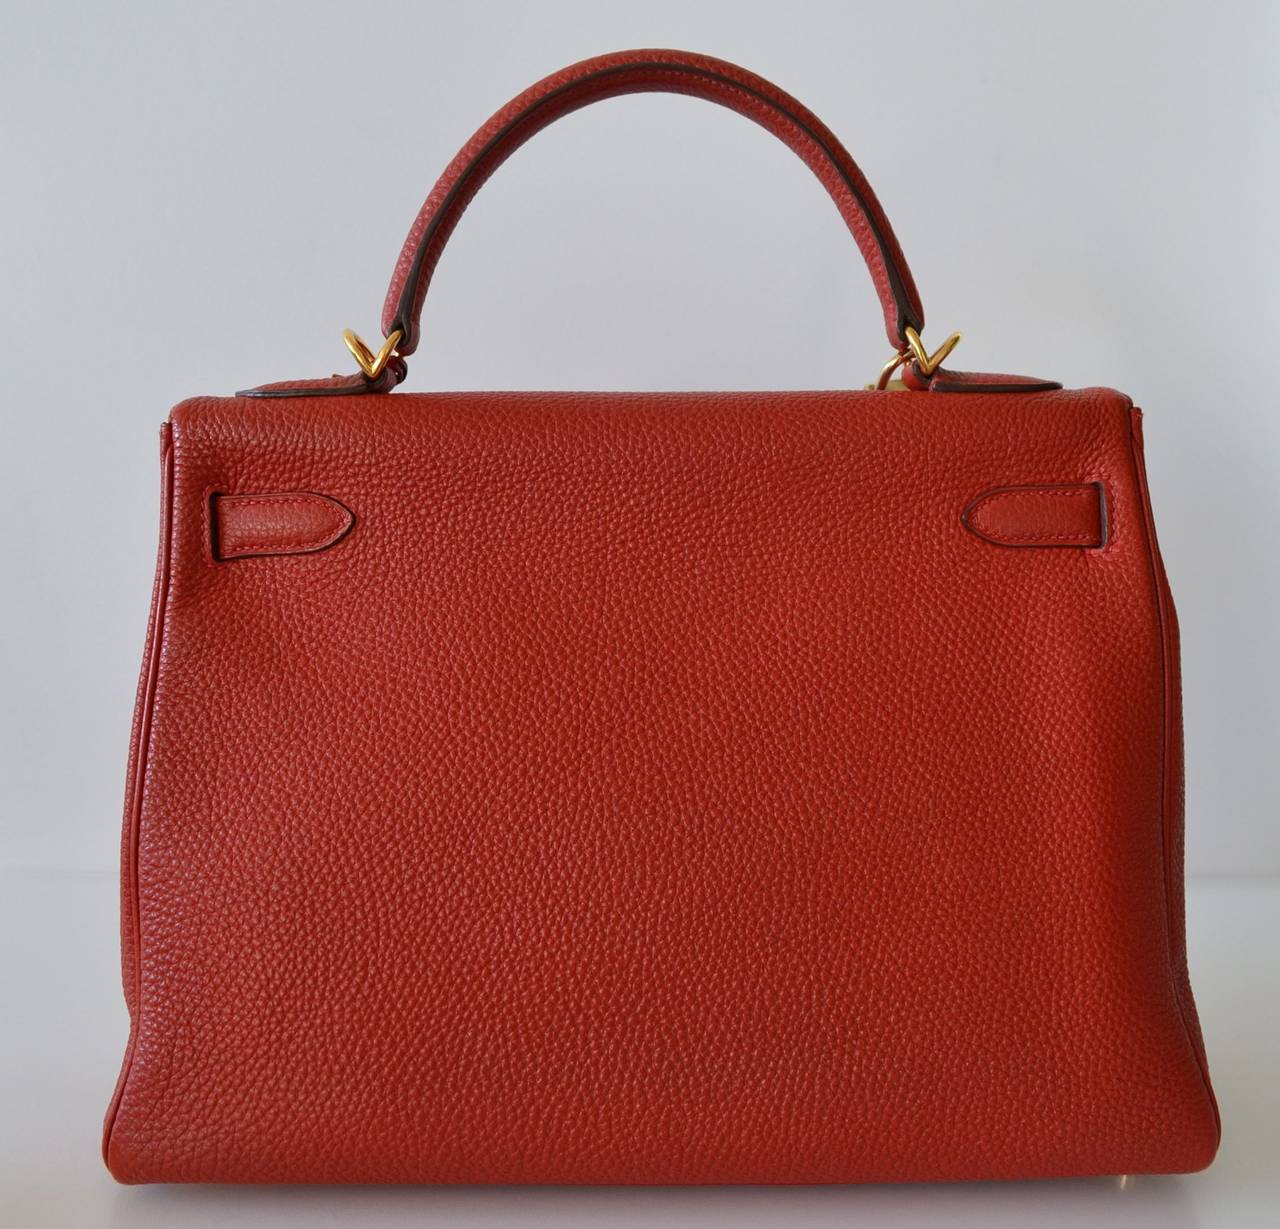 Hermes Kelly 32 Rouge Garance
 
Kelly 2
Togo leather
Retourne  
Gold plated hardware  
 
Excellent condition
Interior is odorless without stains
Corners are excellent
Pocket zipper and turn lock are in perfect working    
 
Hermes Paris